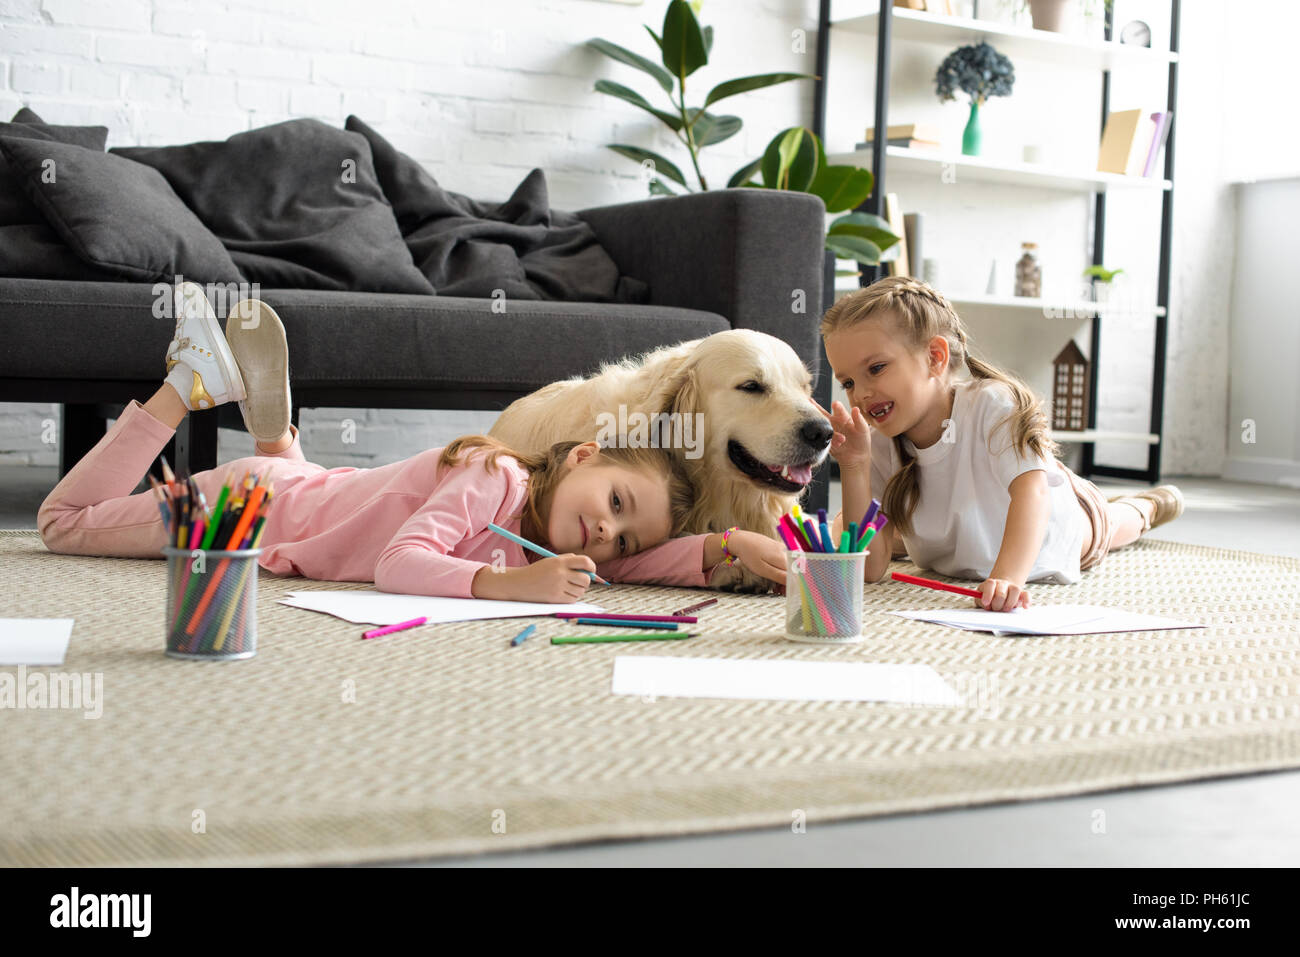 smiling kids lying on floor together with golden retriever dog at home Stock Photo